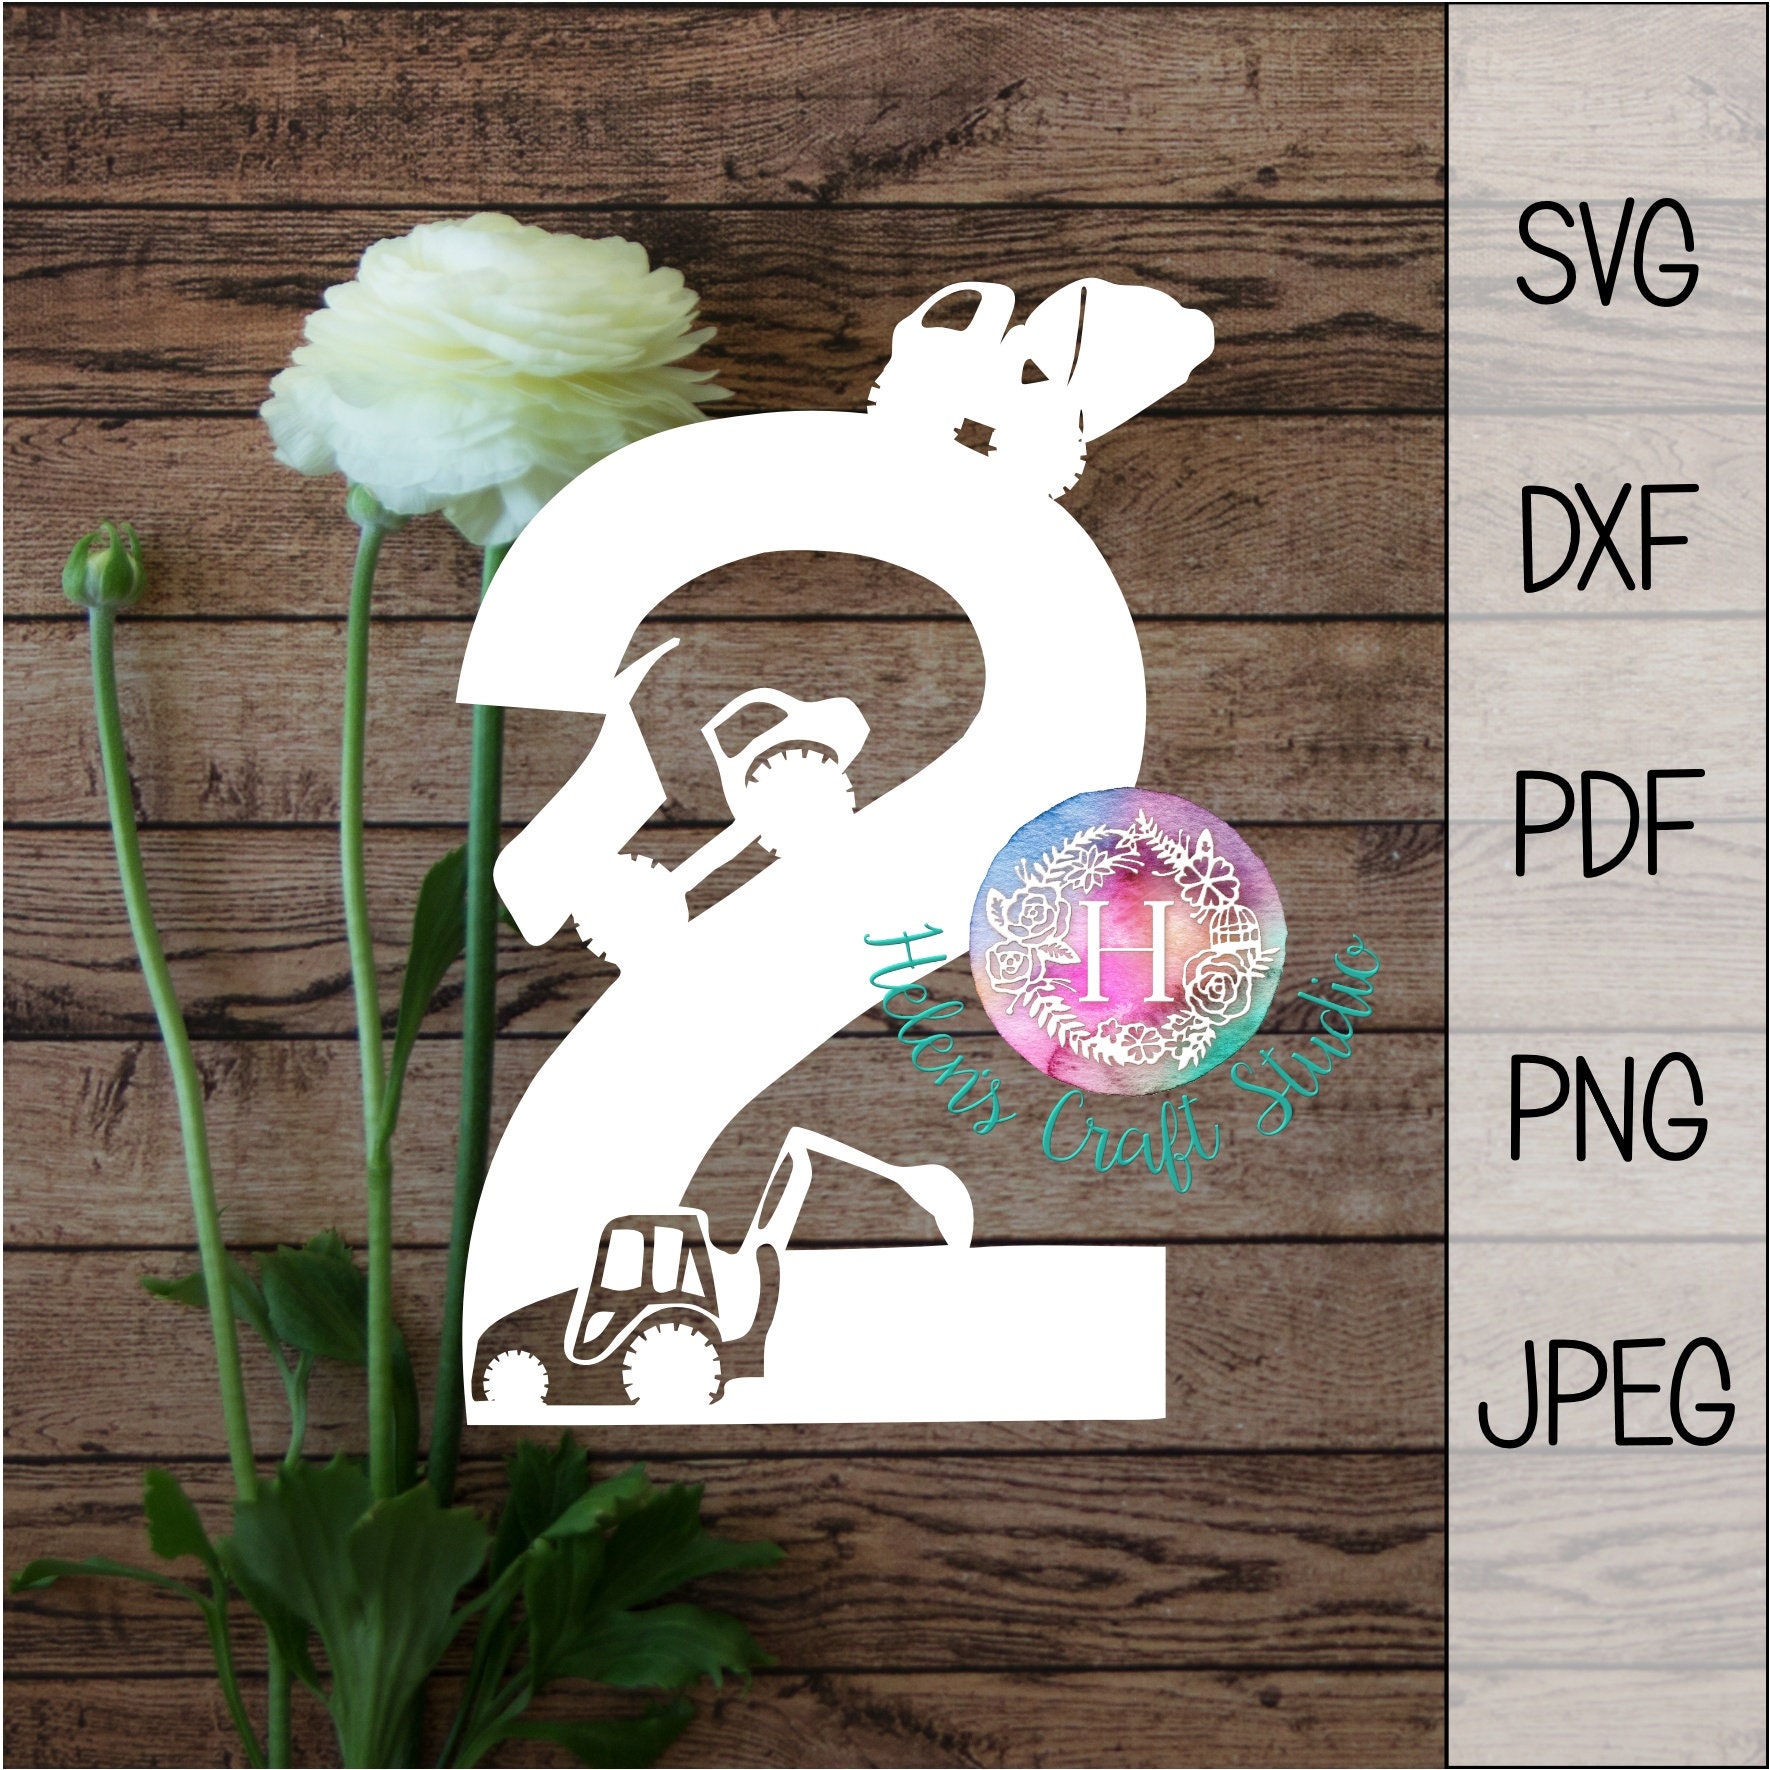 Download Construction 2nd birthday SVG cutting file and DXF file for